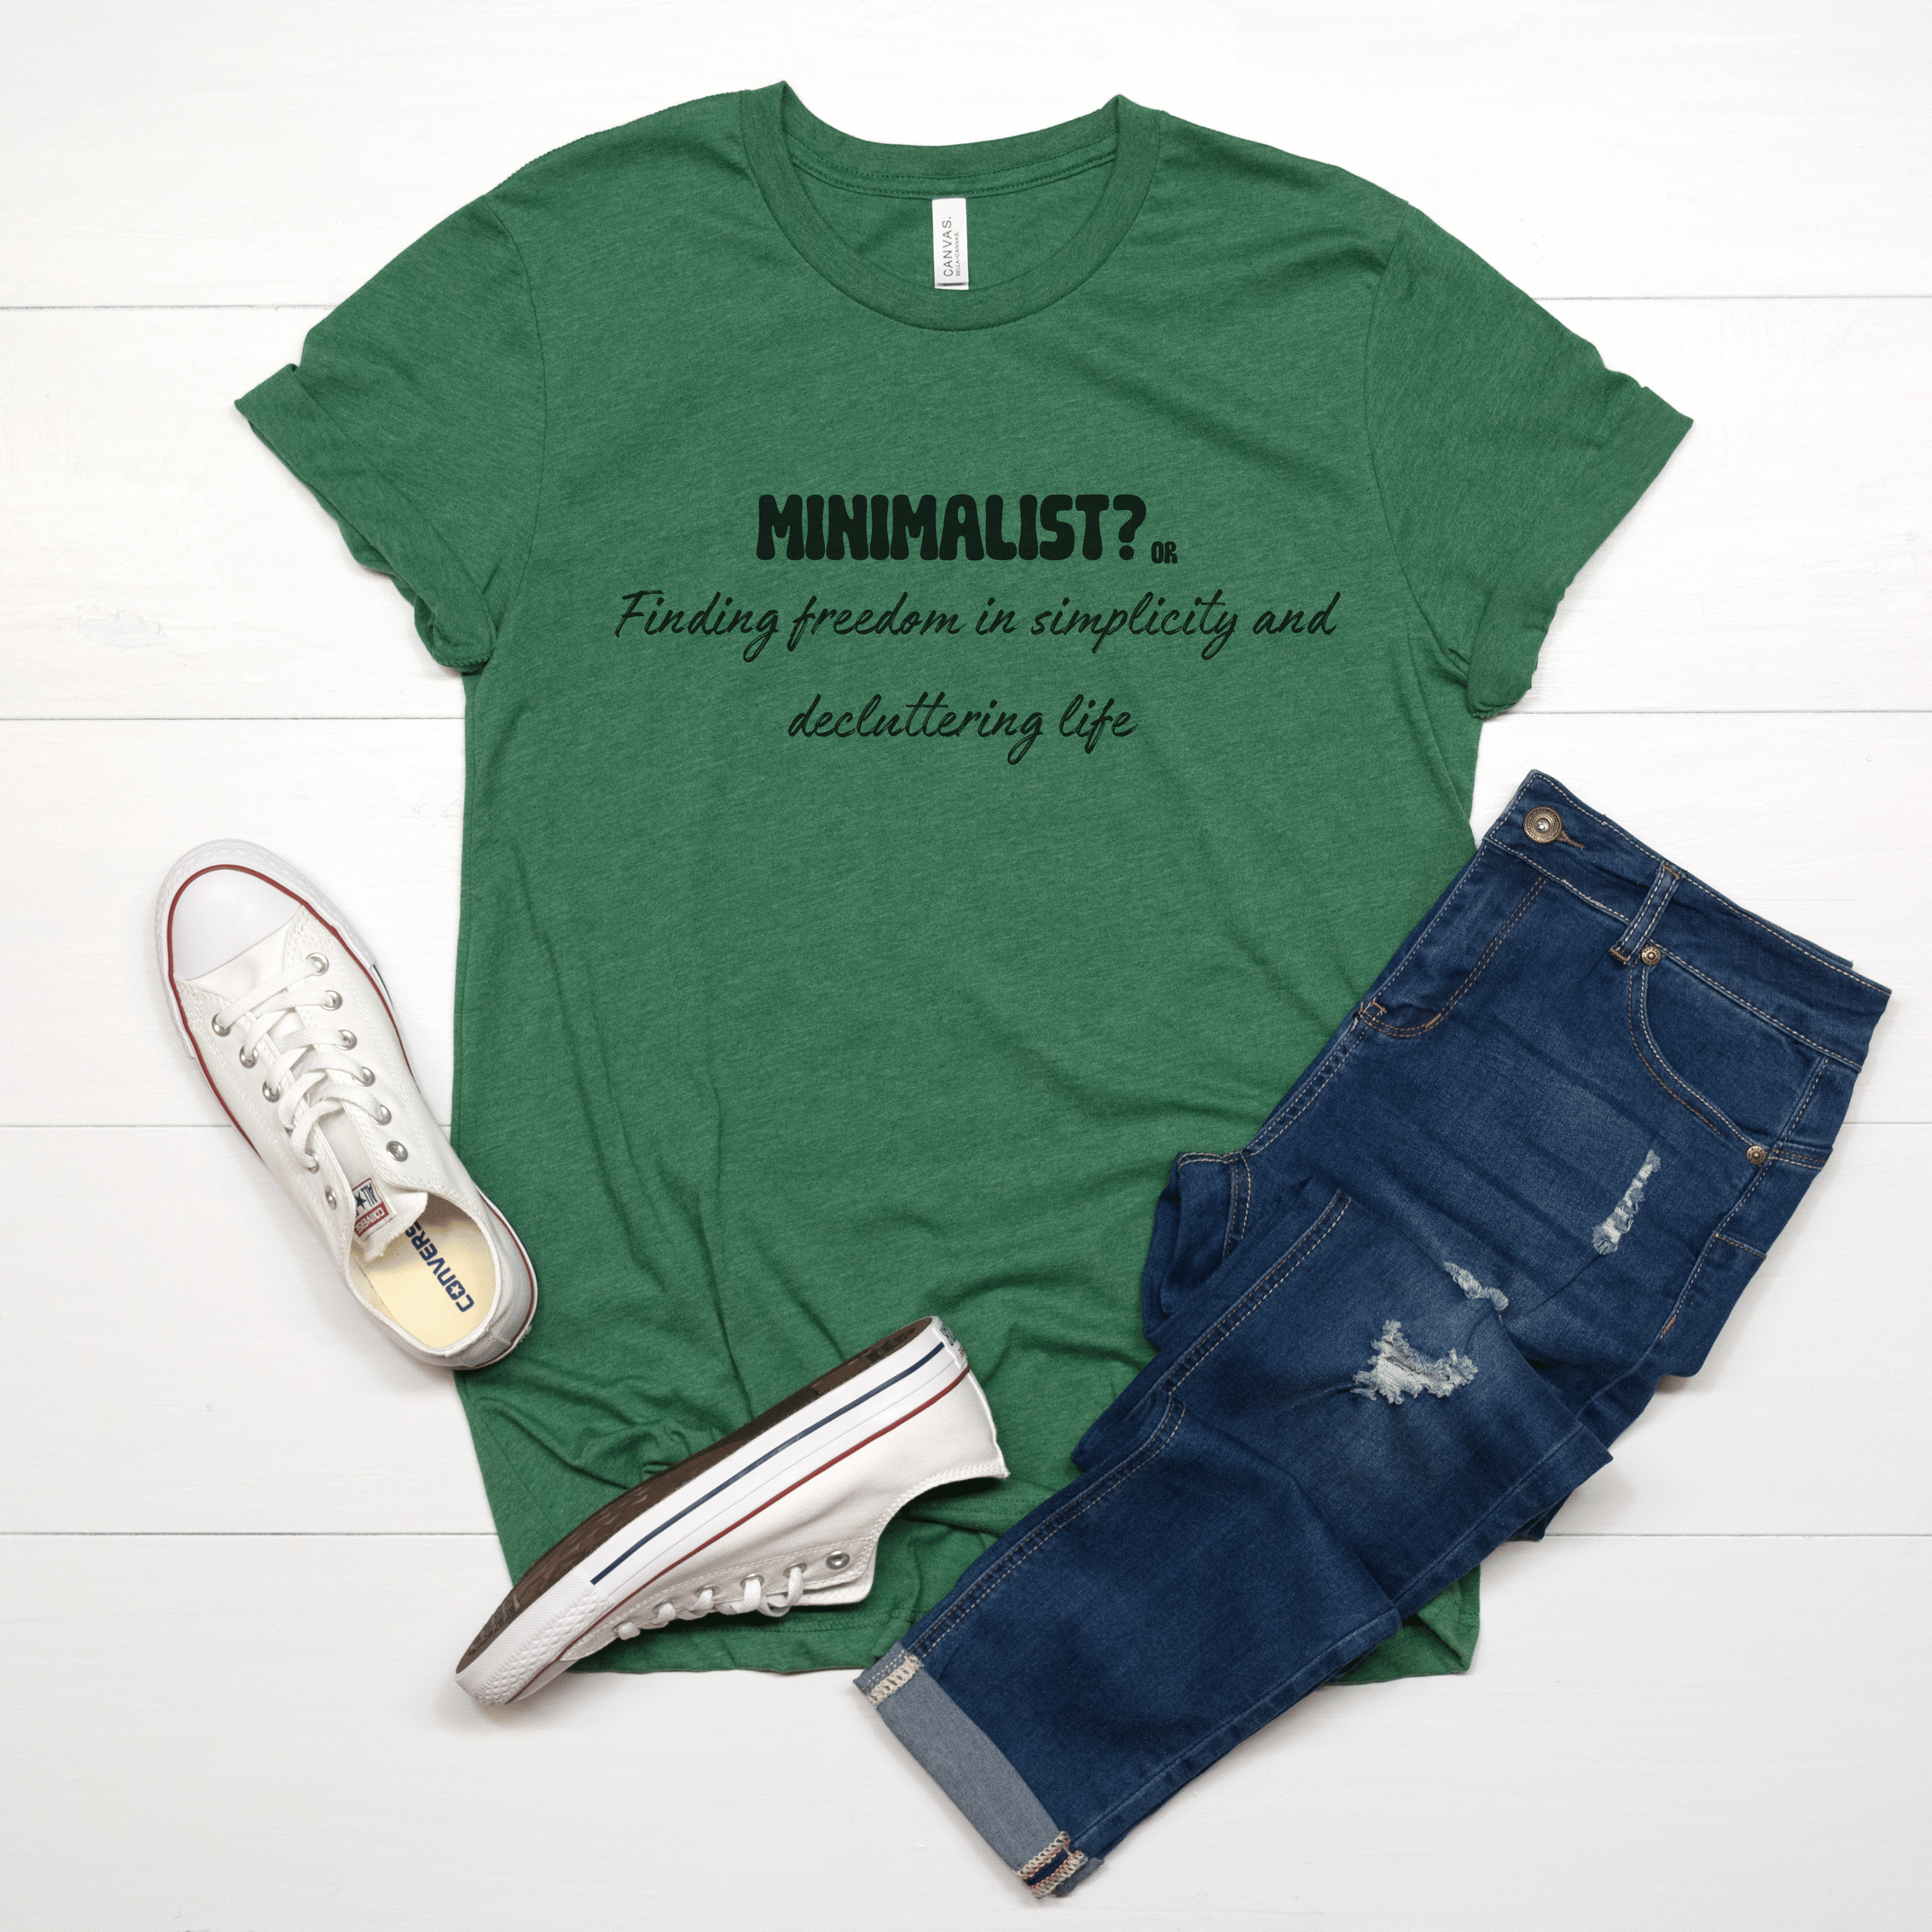 Minimalist? or Finding freedom in simplicity and decluttering life T-shirt